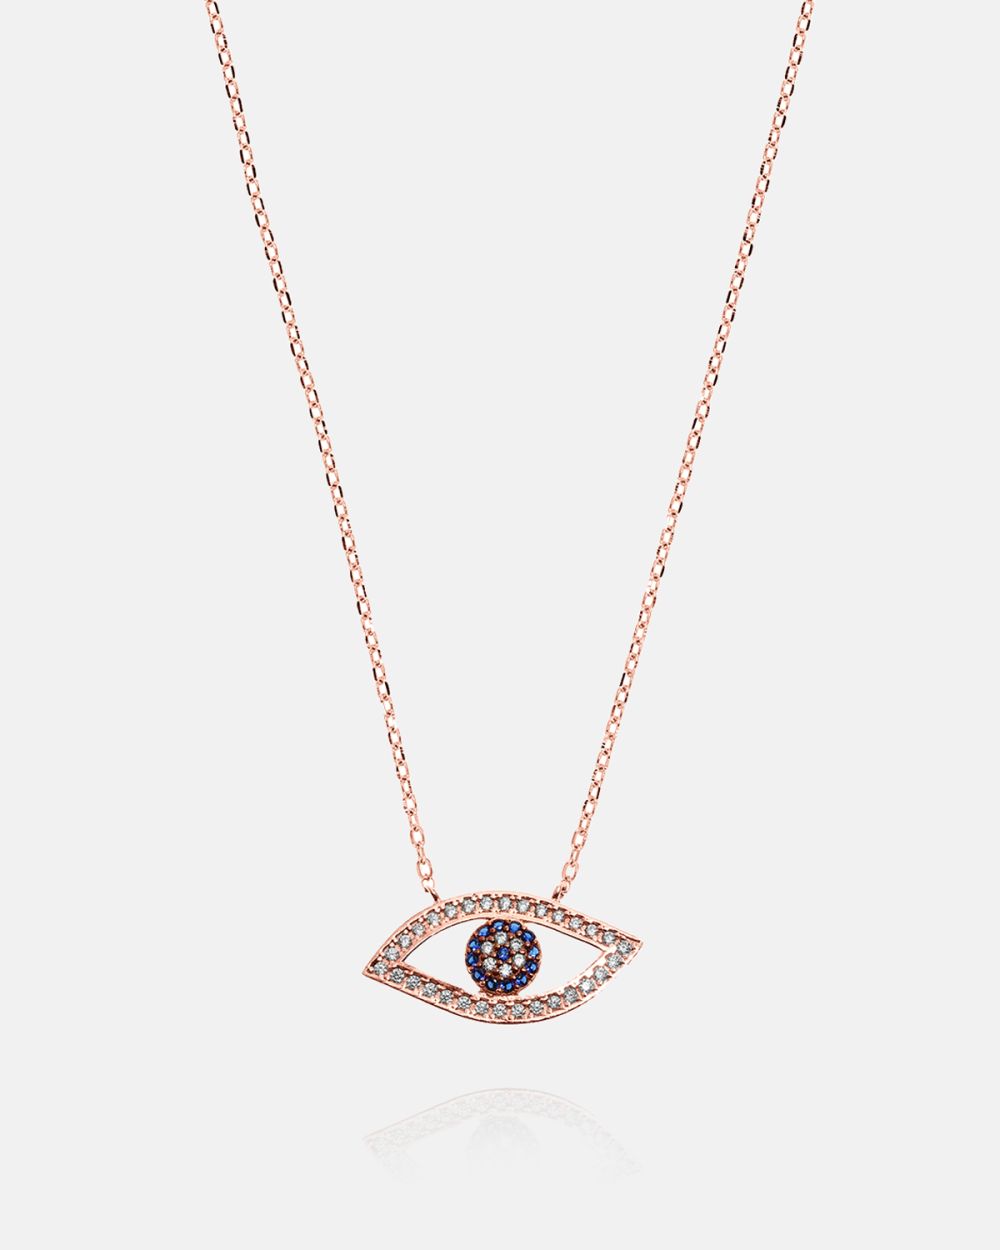 Blue Mystic Eye Necklace in Rose Silver with Zirconias